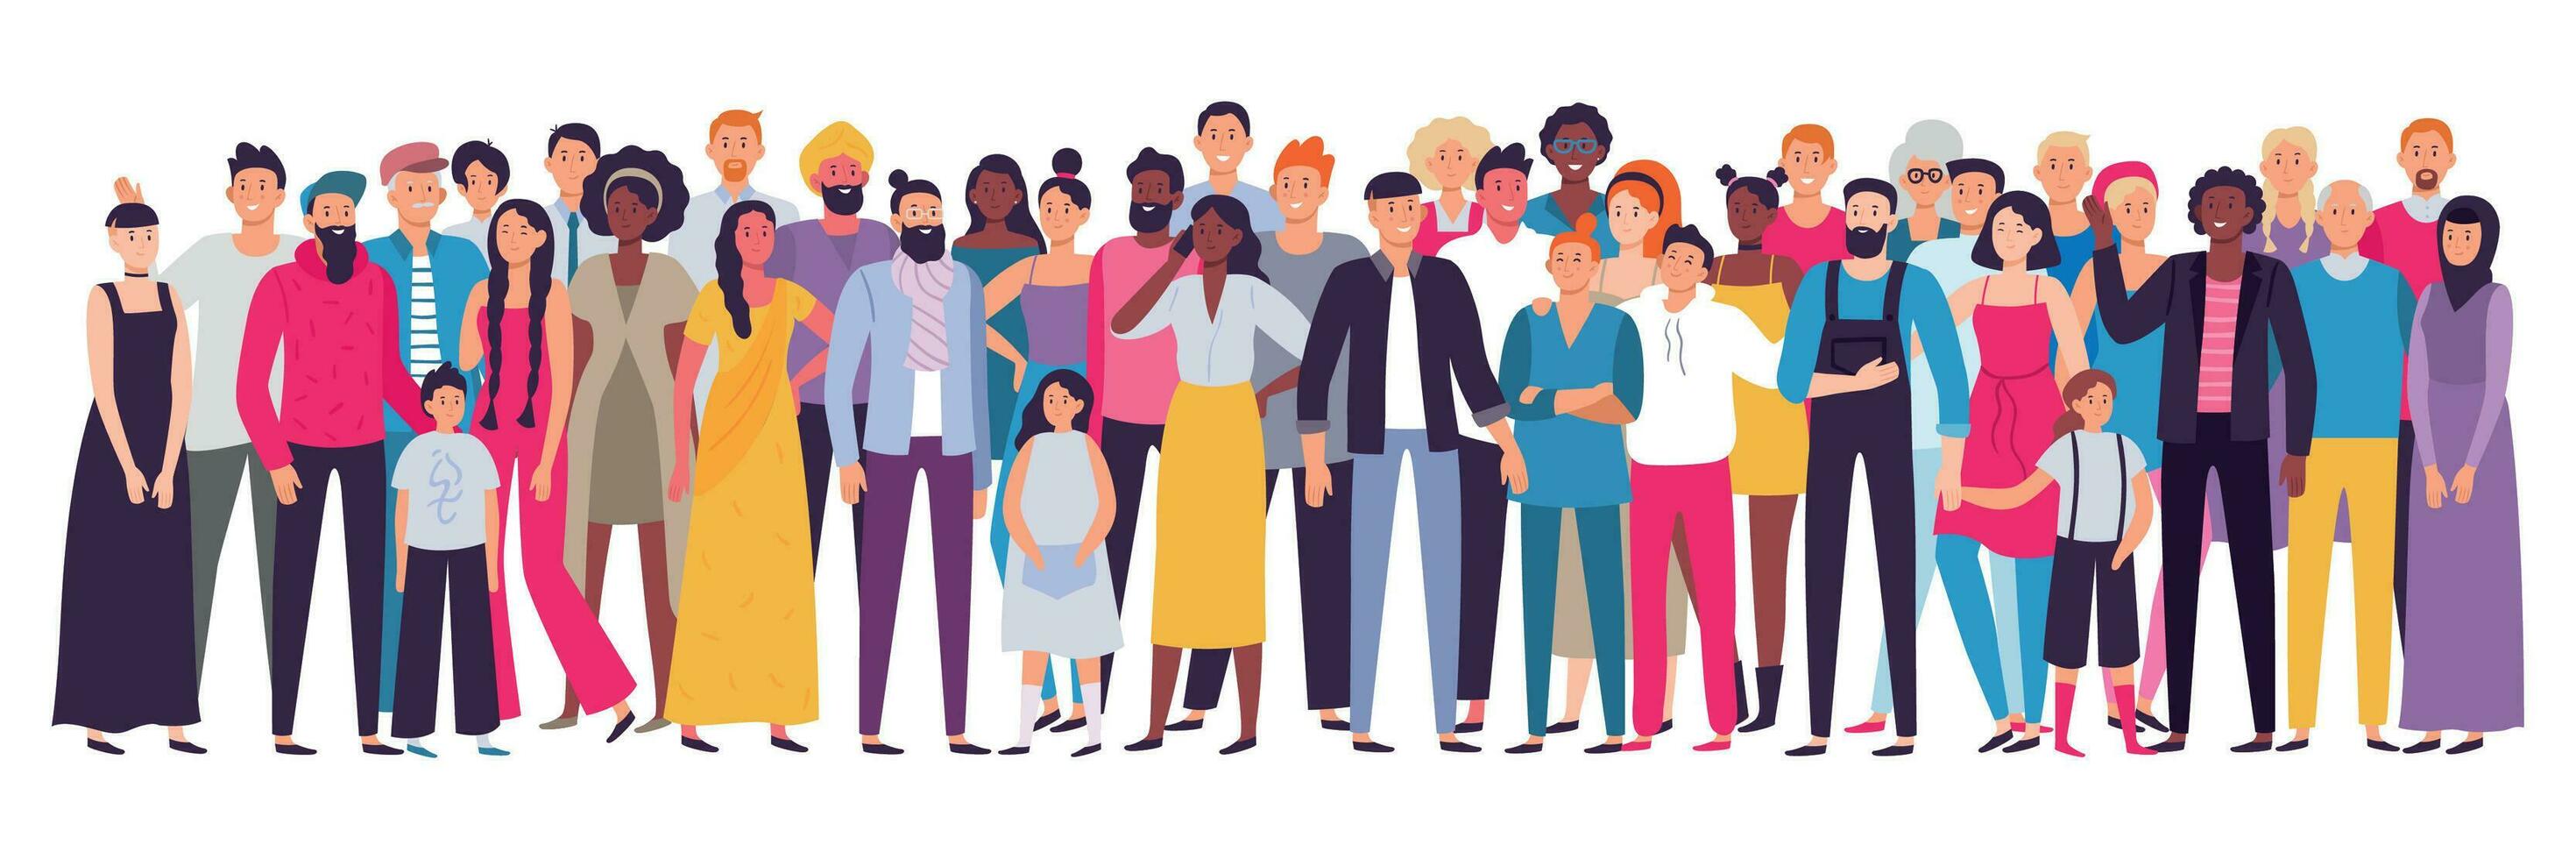 Multiethnic group of people. Society, multicultural community portrait and citizens. Young, adult and elder people vector illustration